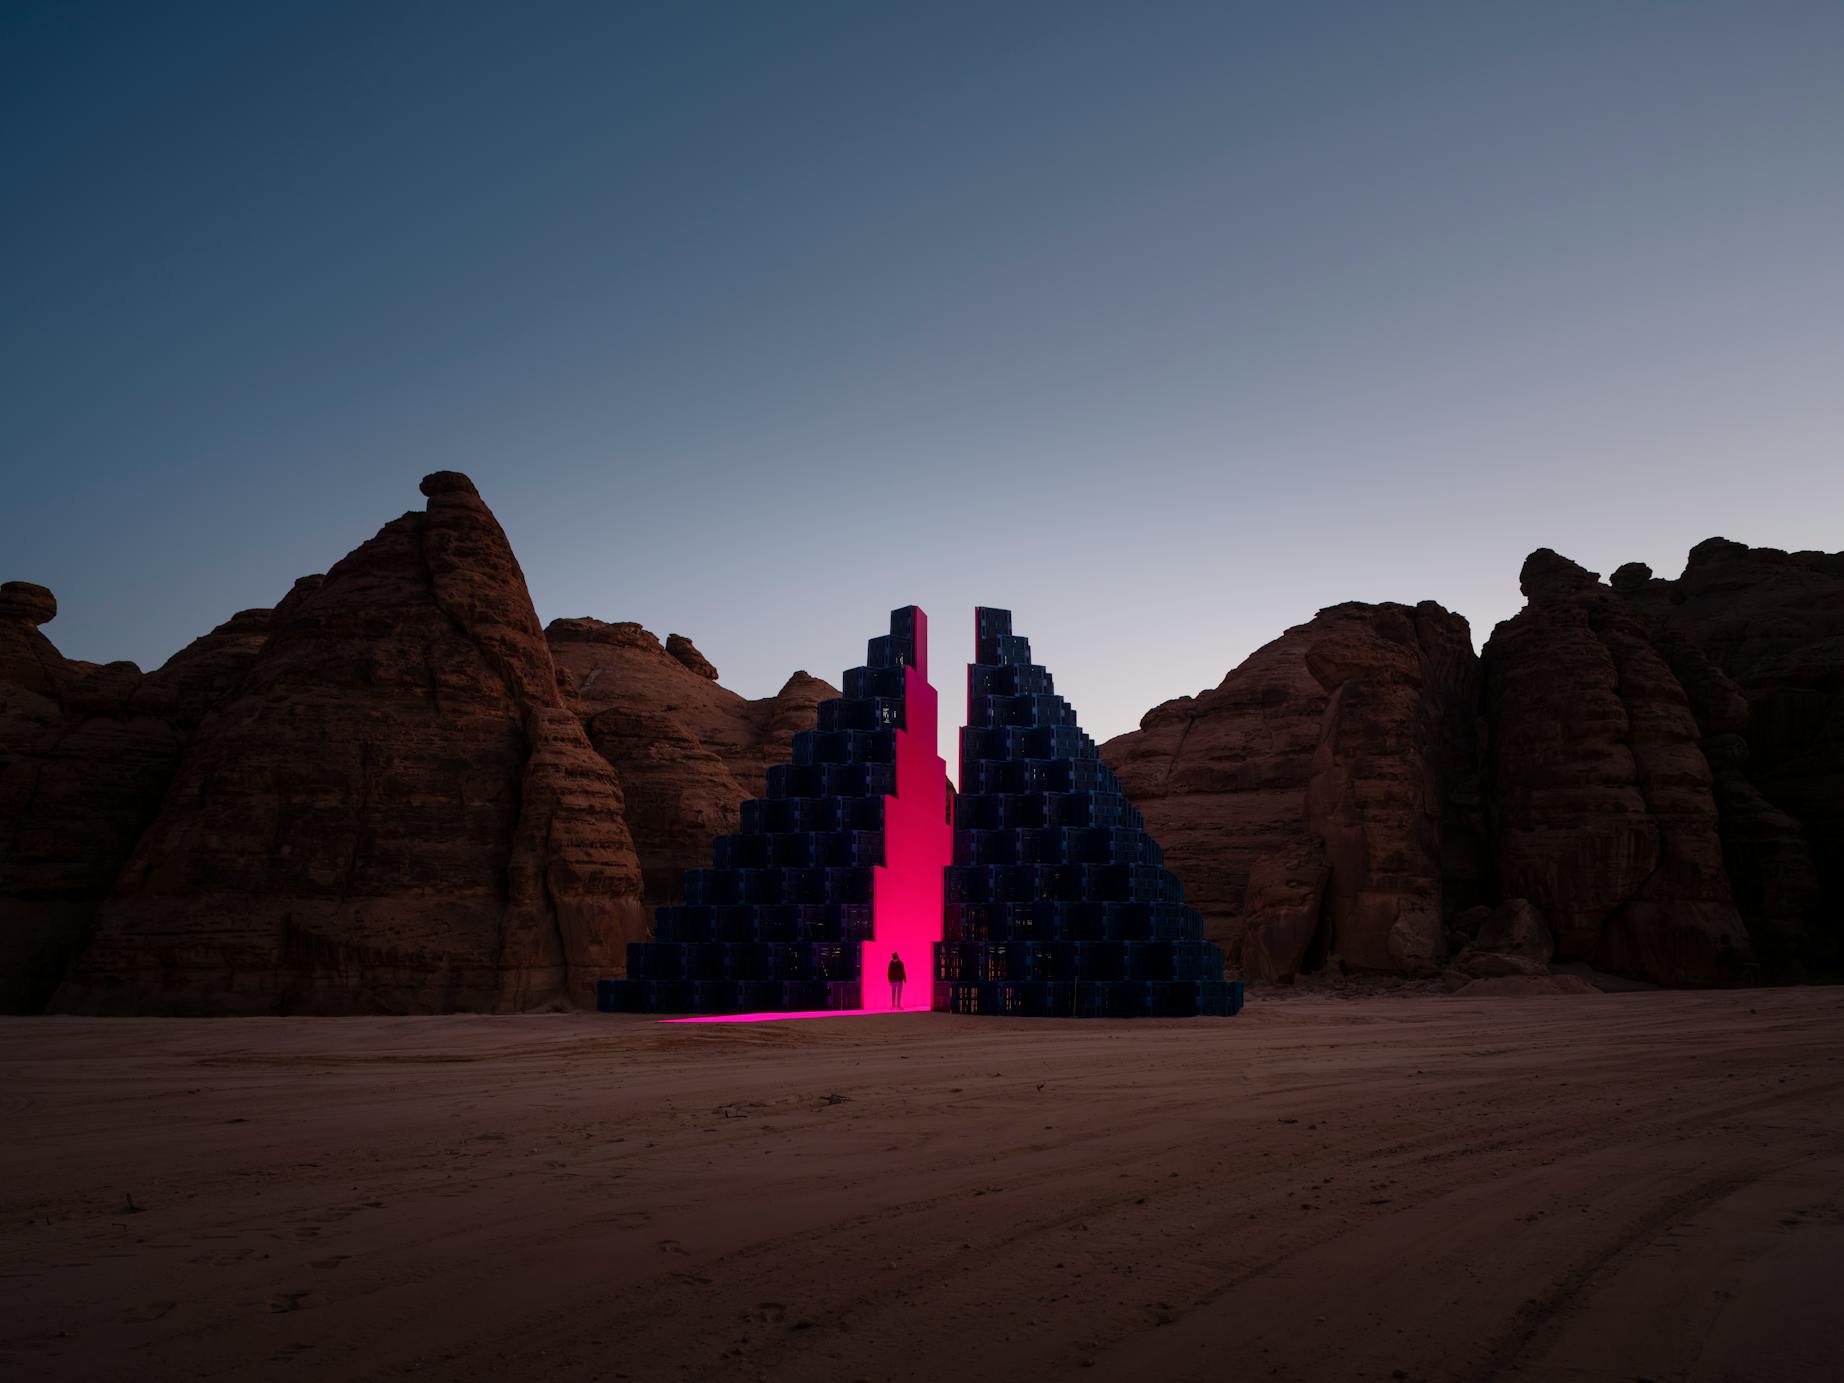 Rashed Al Shashai A Concise Passage installation view at Desert